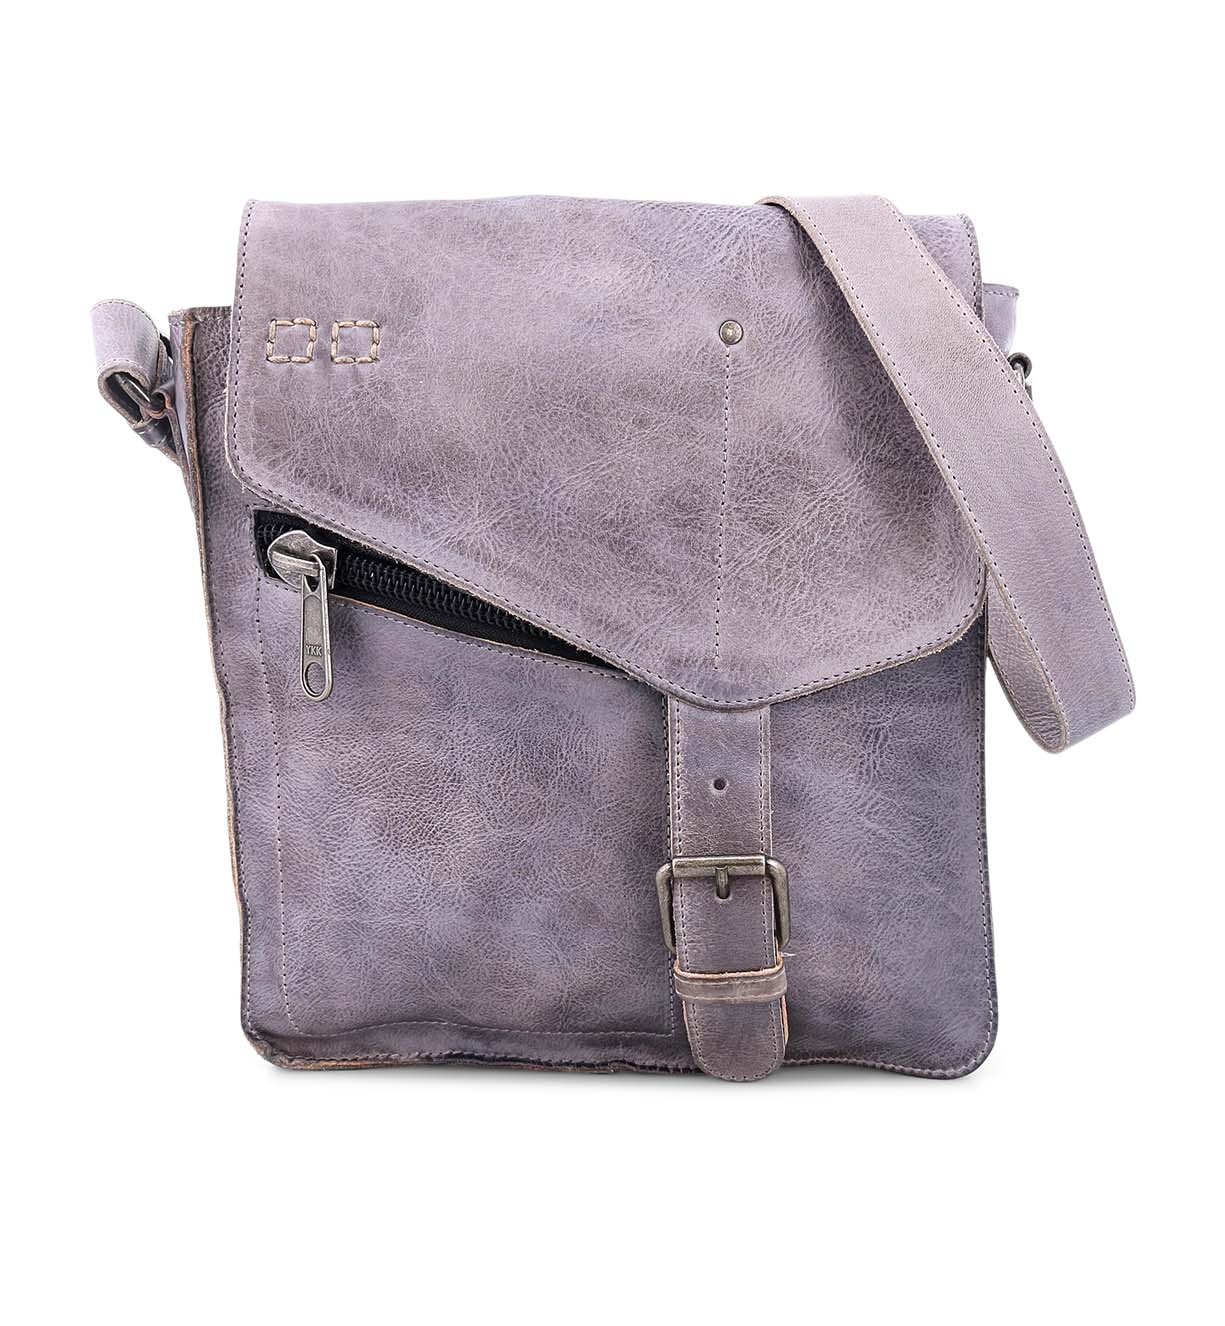 A timeless Venice Beach grey leather messenger bag with a zipper, handmade and vintage-inspired, by Bed Stu.